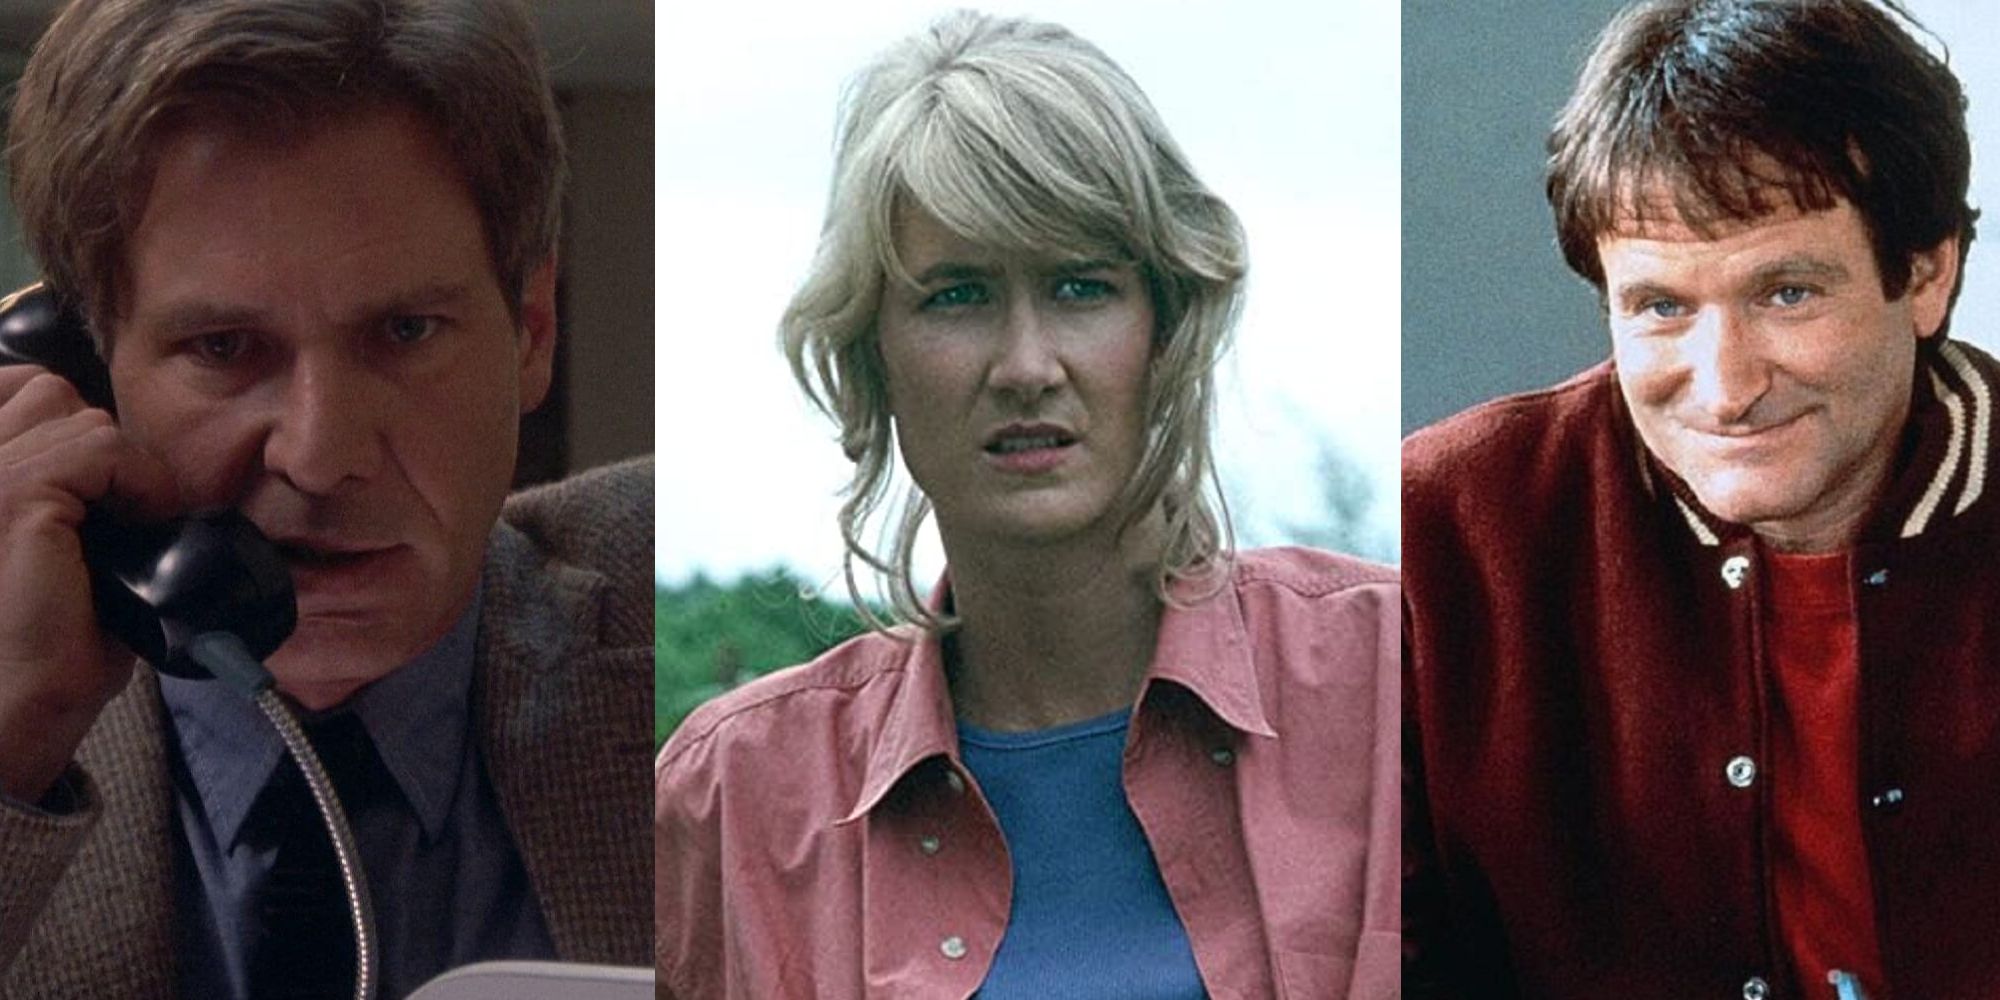 Harrison Ford on the phone; Laura Dern in Jurassic Park; Robin Williams smiling